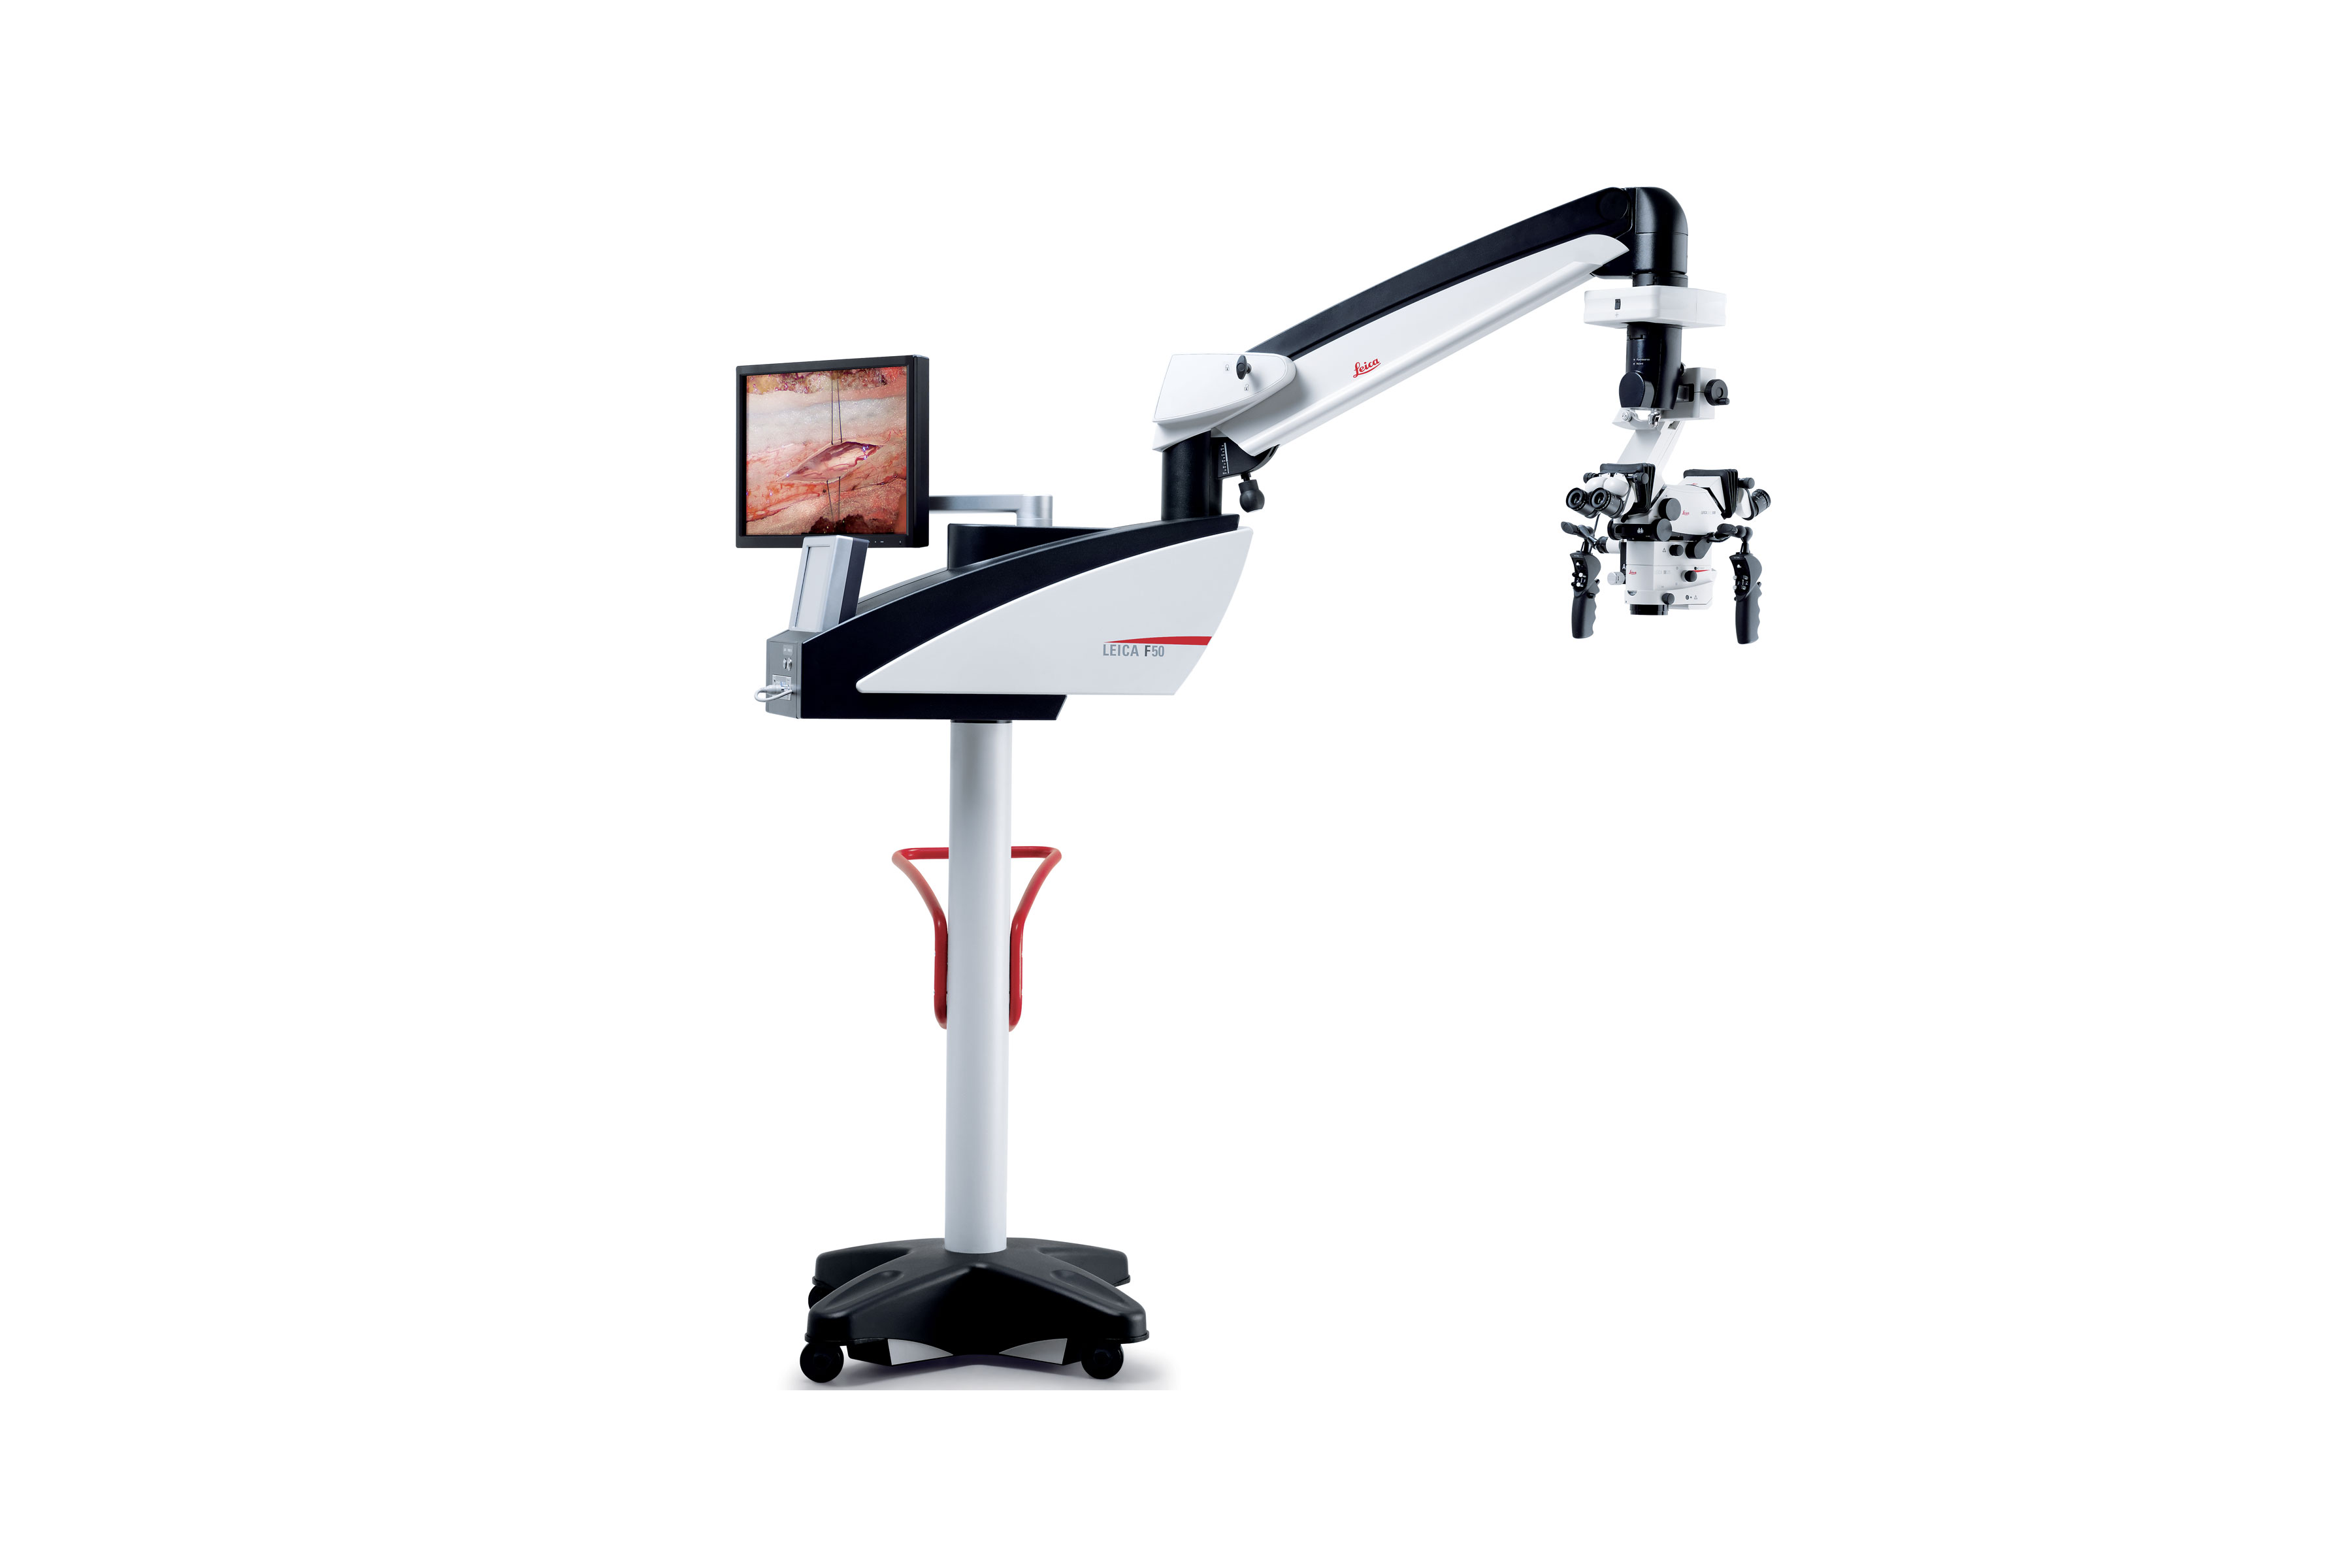 Leica M525 F50 surgical microscope for Neuro, Spine, ENT, and Plastic Reconstructive Surgery